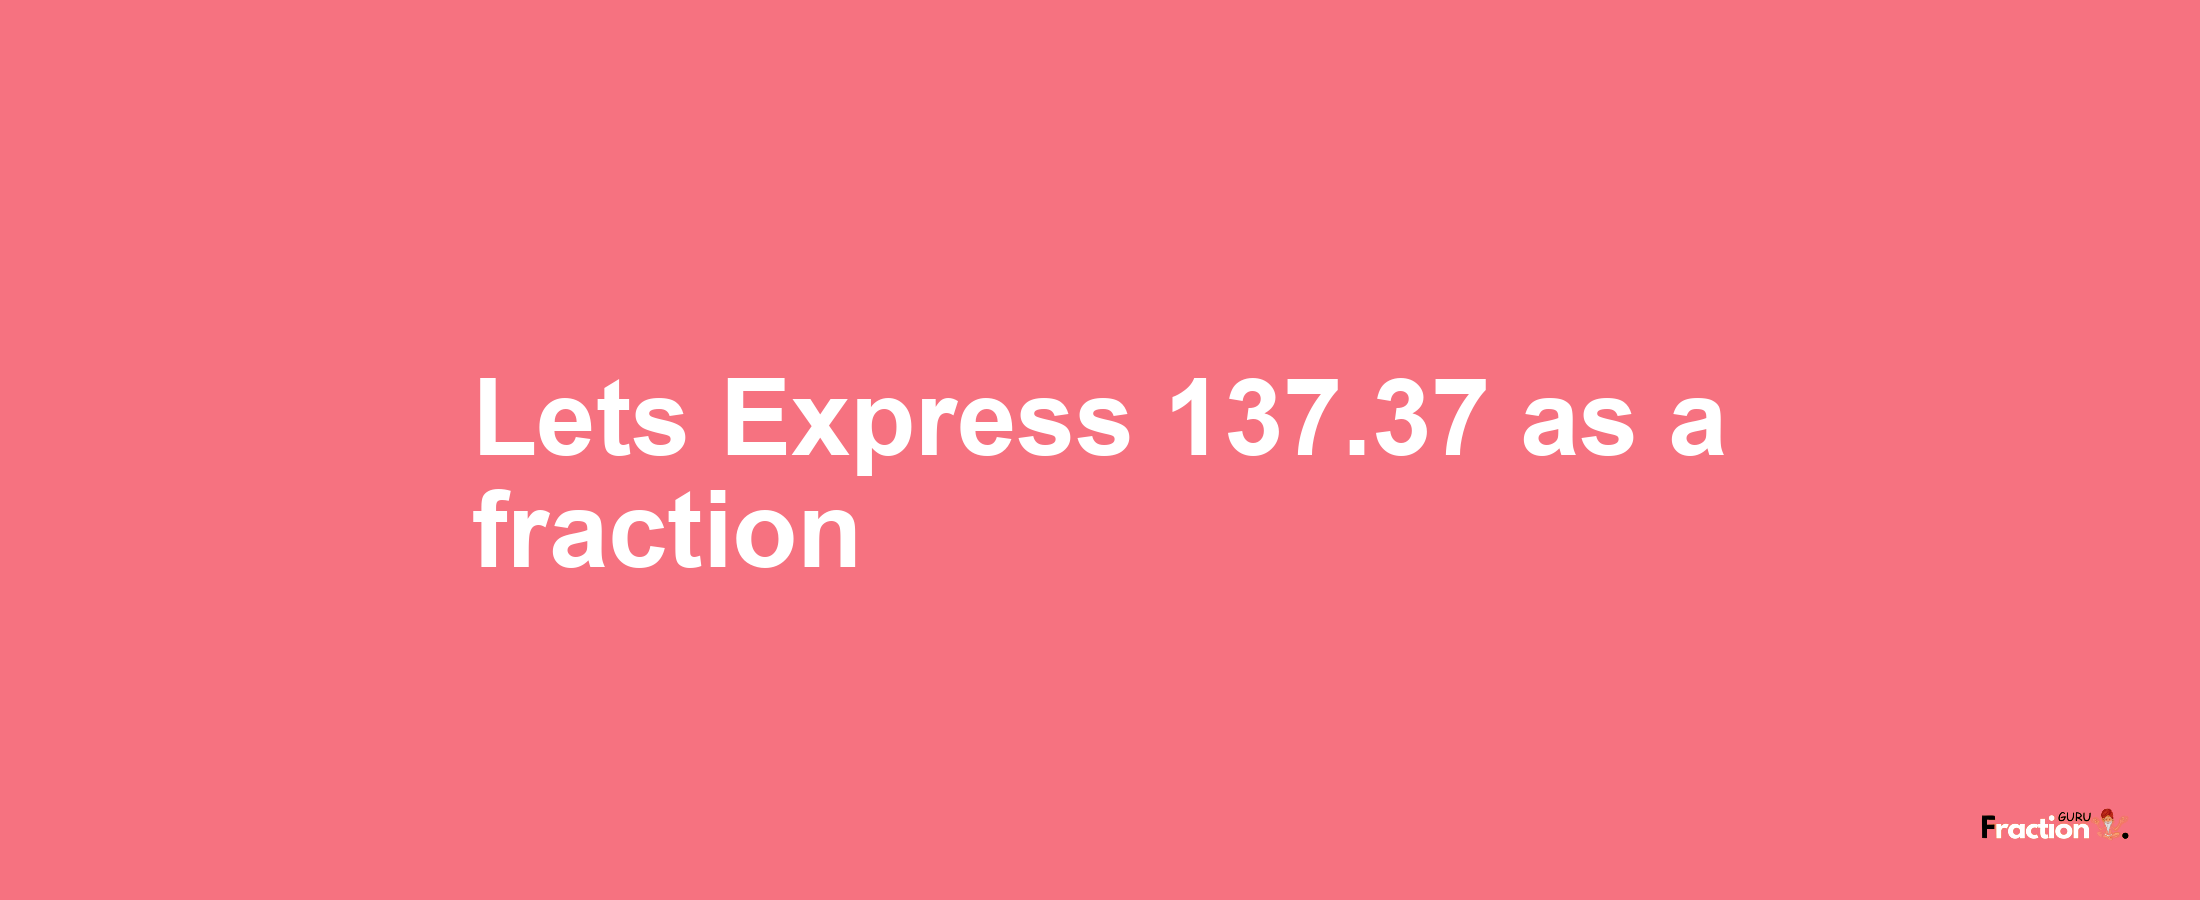 Lets Express 137.37 as afraction